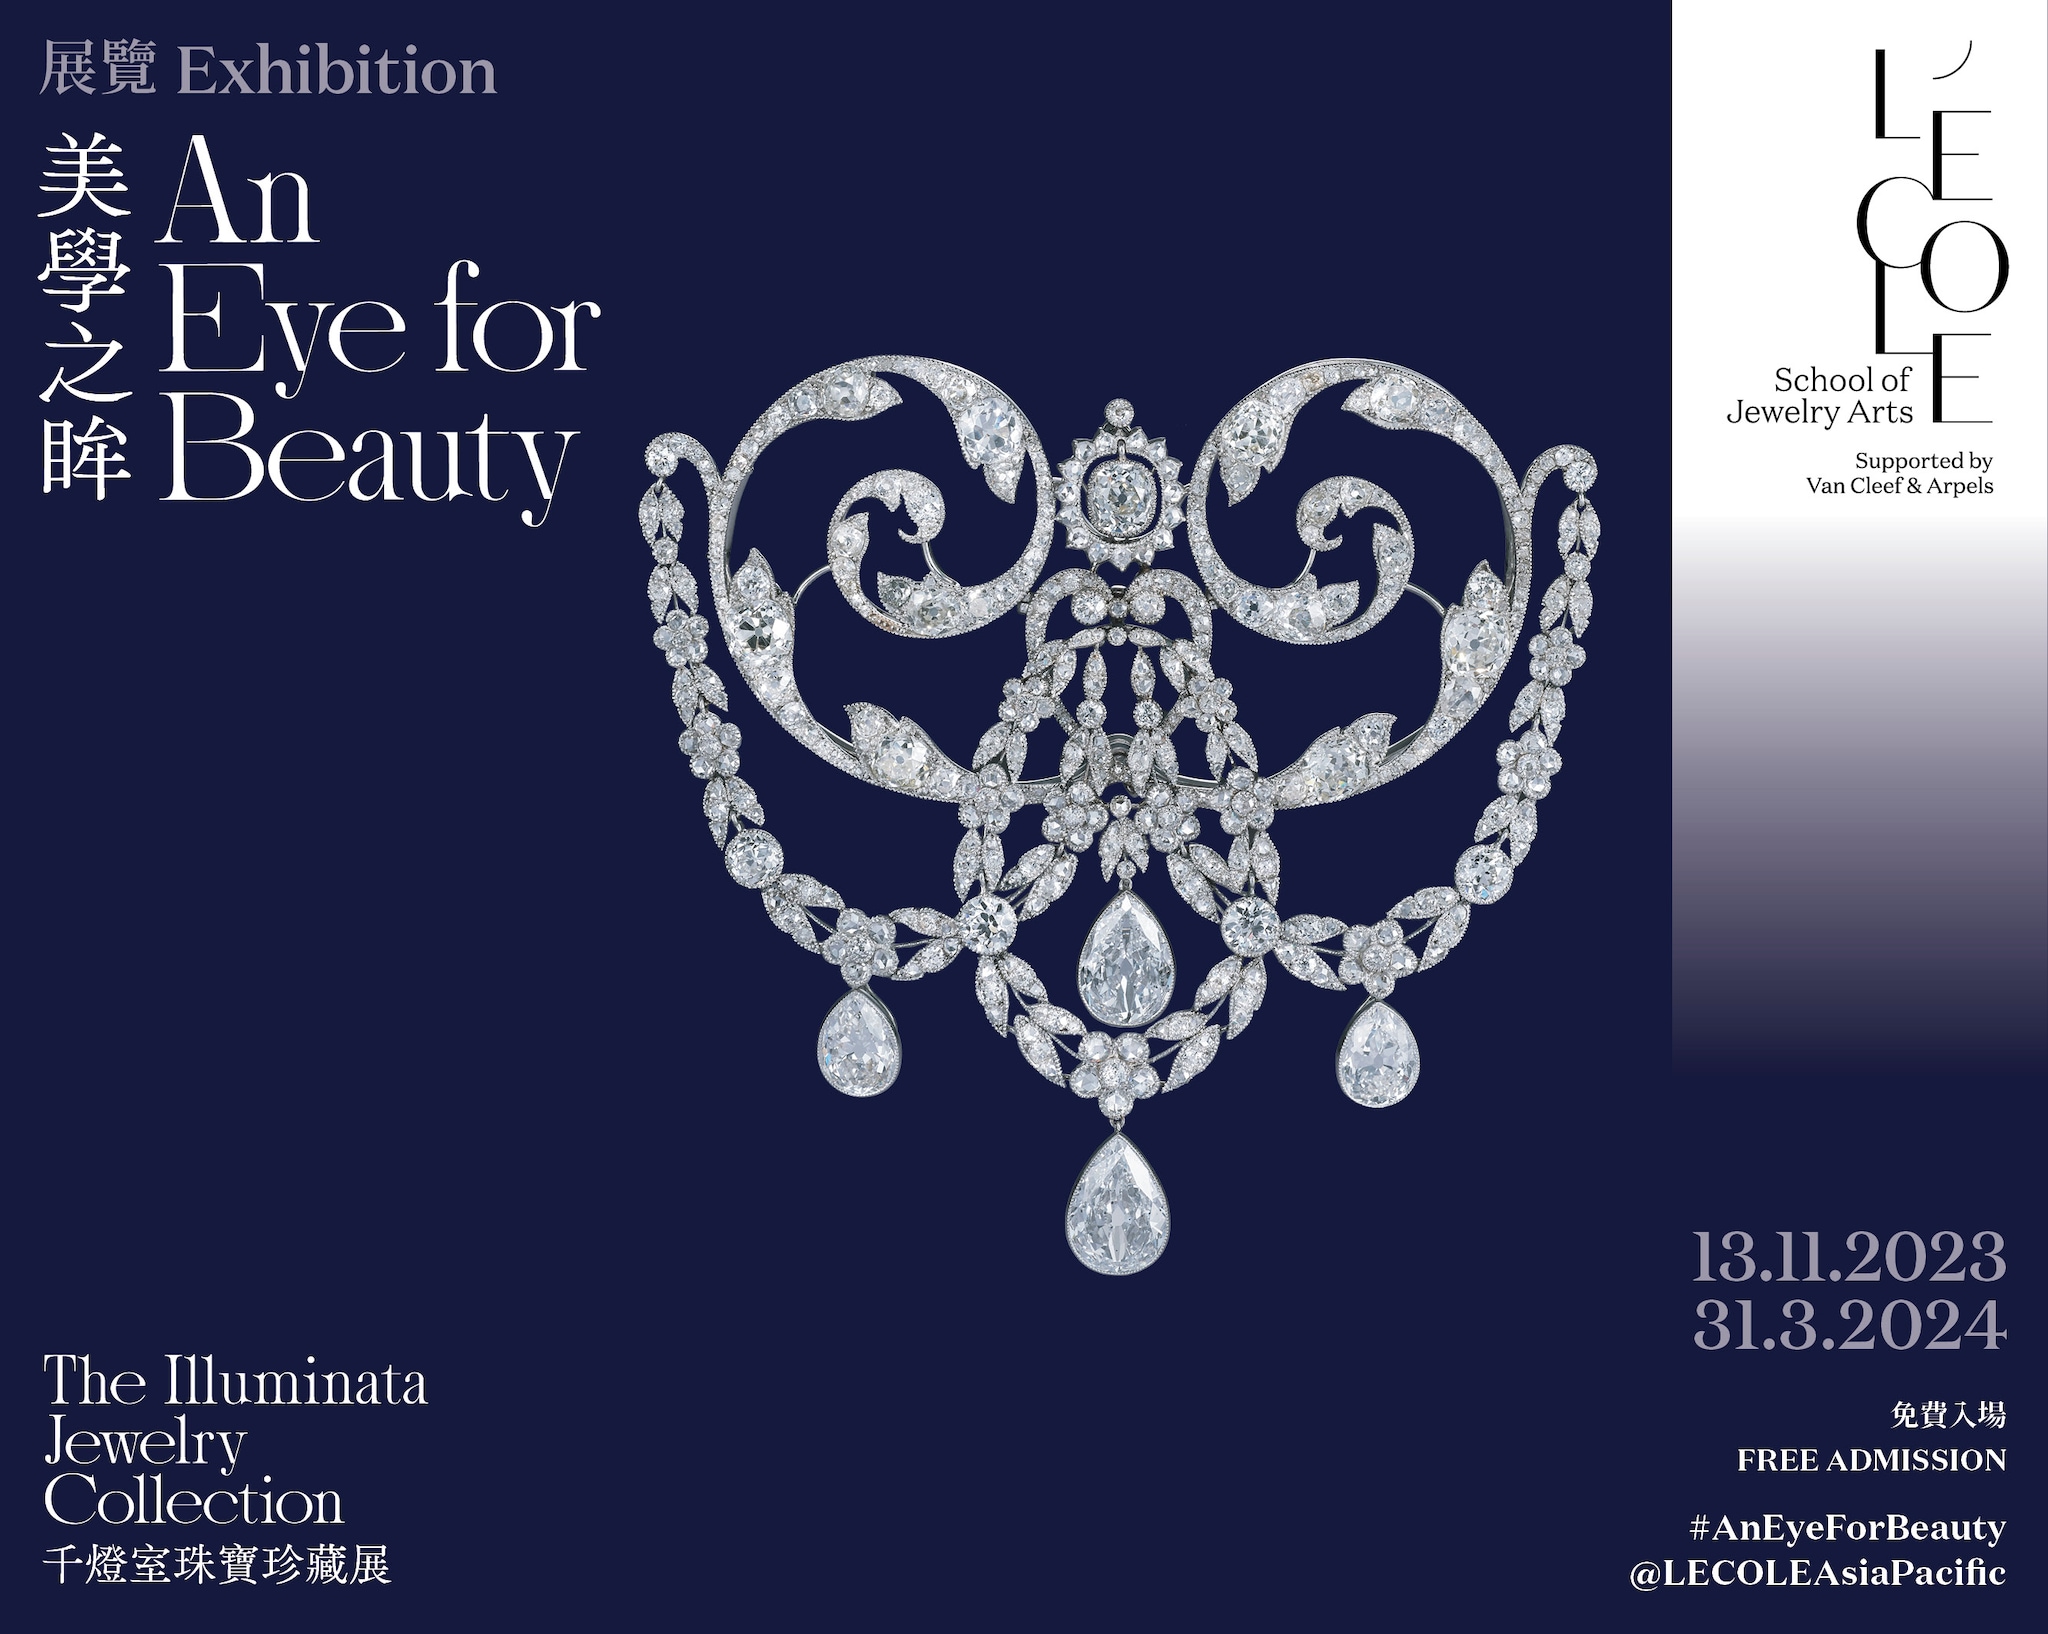 An Eye for Beauty, The Illuminata Jewelry Collection Exhibition, L'ECOLE, School of Jewelry Arts, K11 MUSEA, Hong Kong